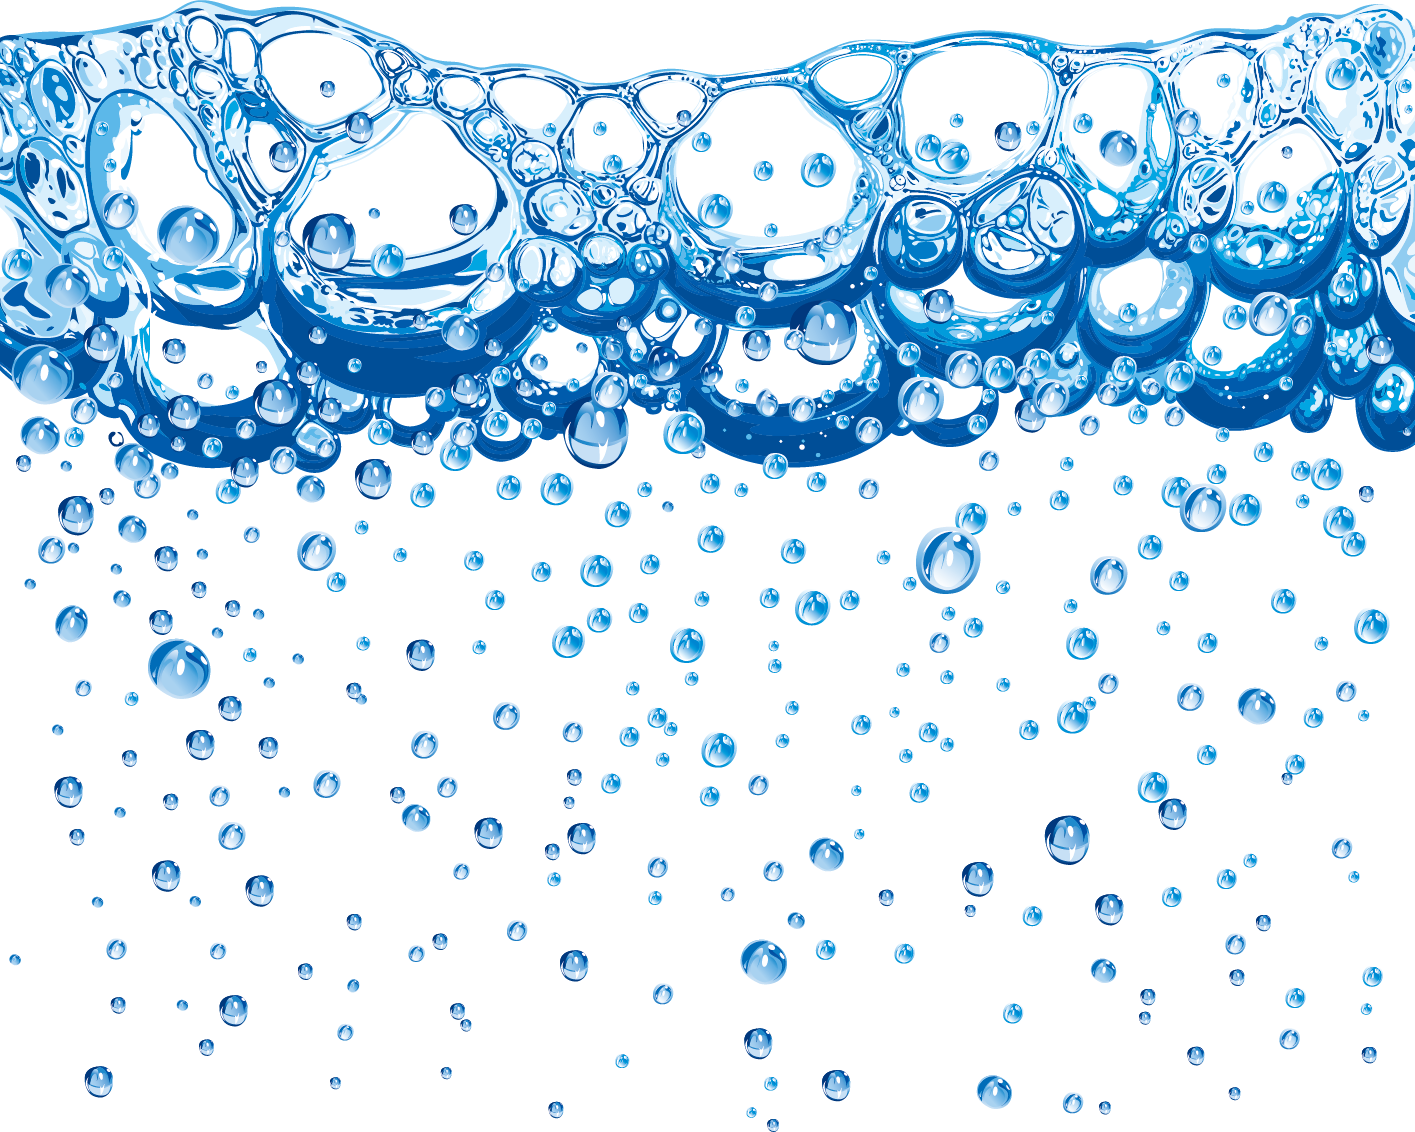 Download PNG image - Water Bubbles Transparent Background 